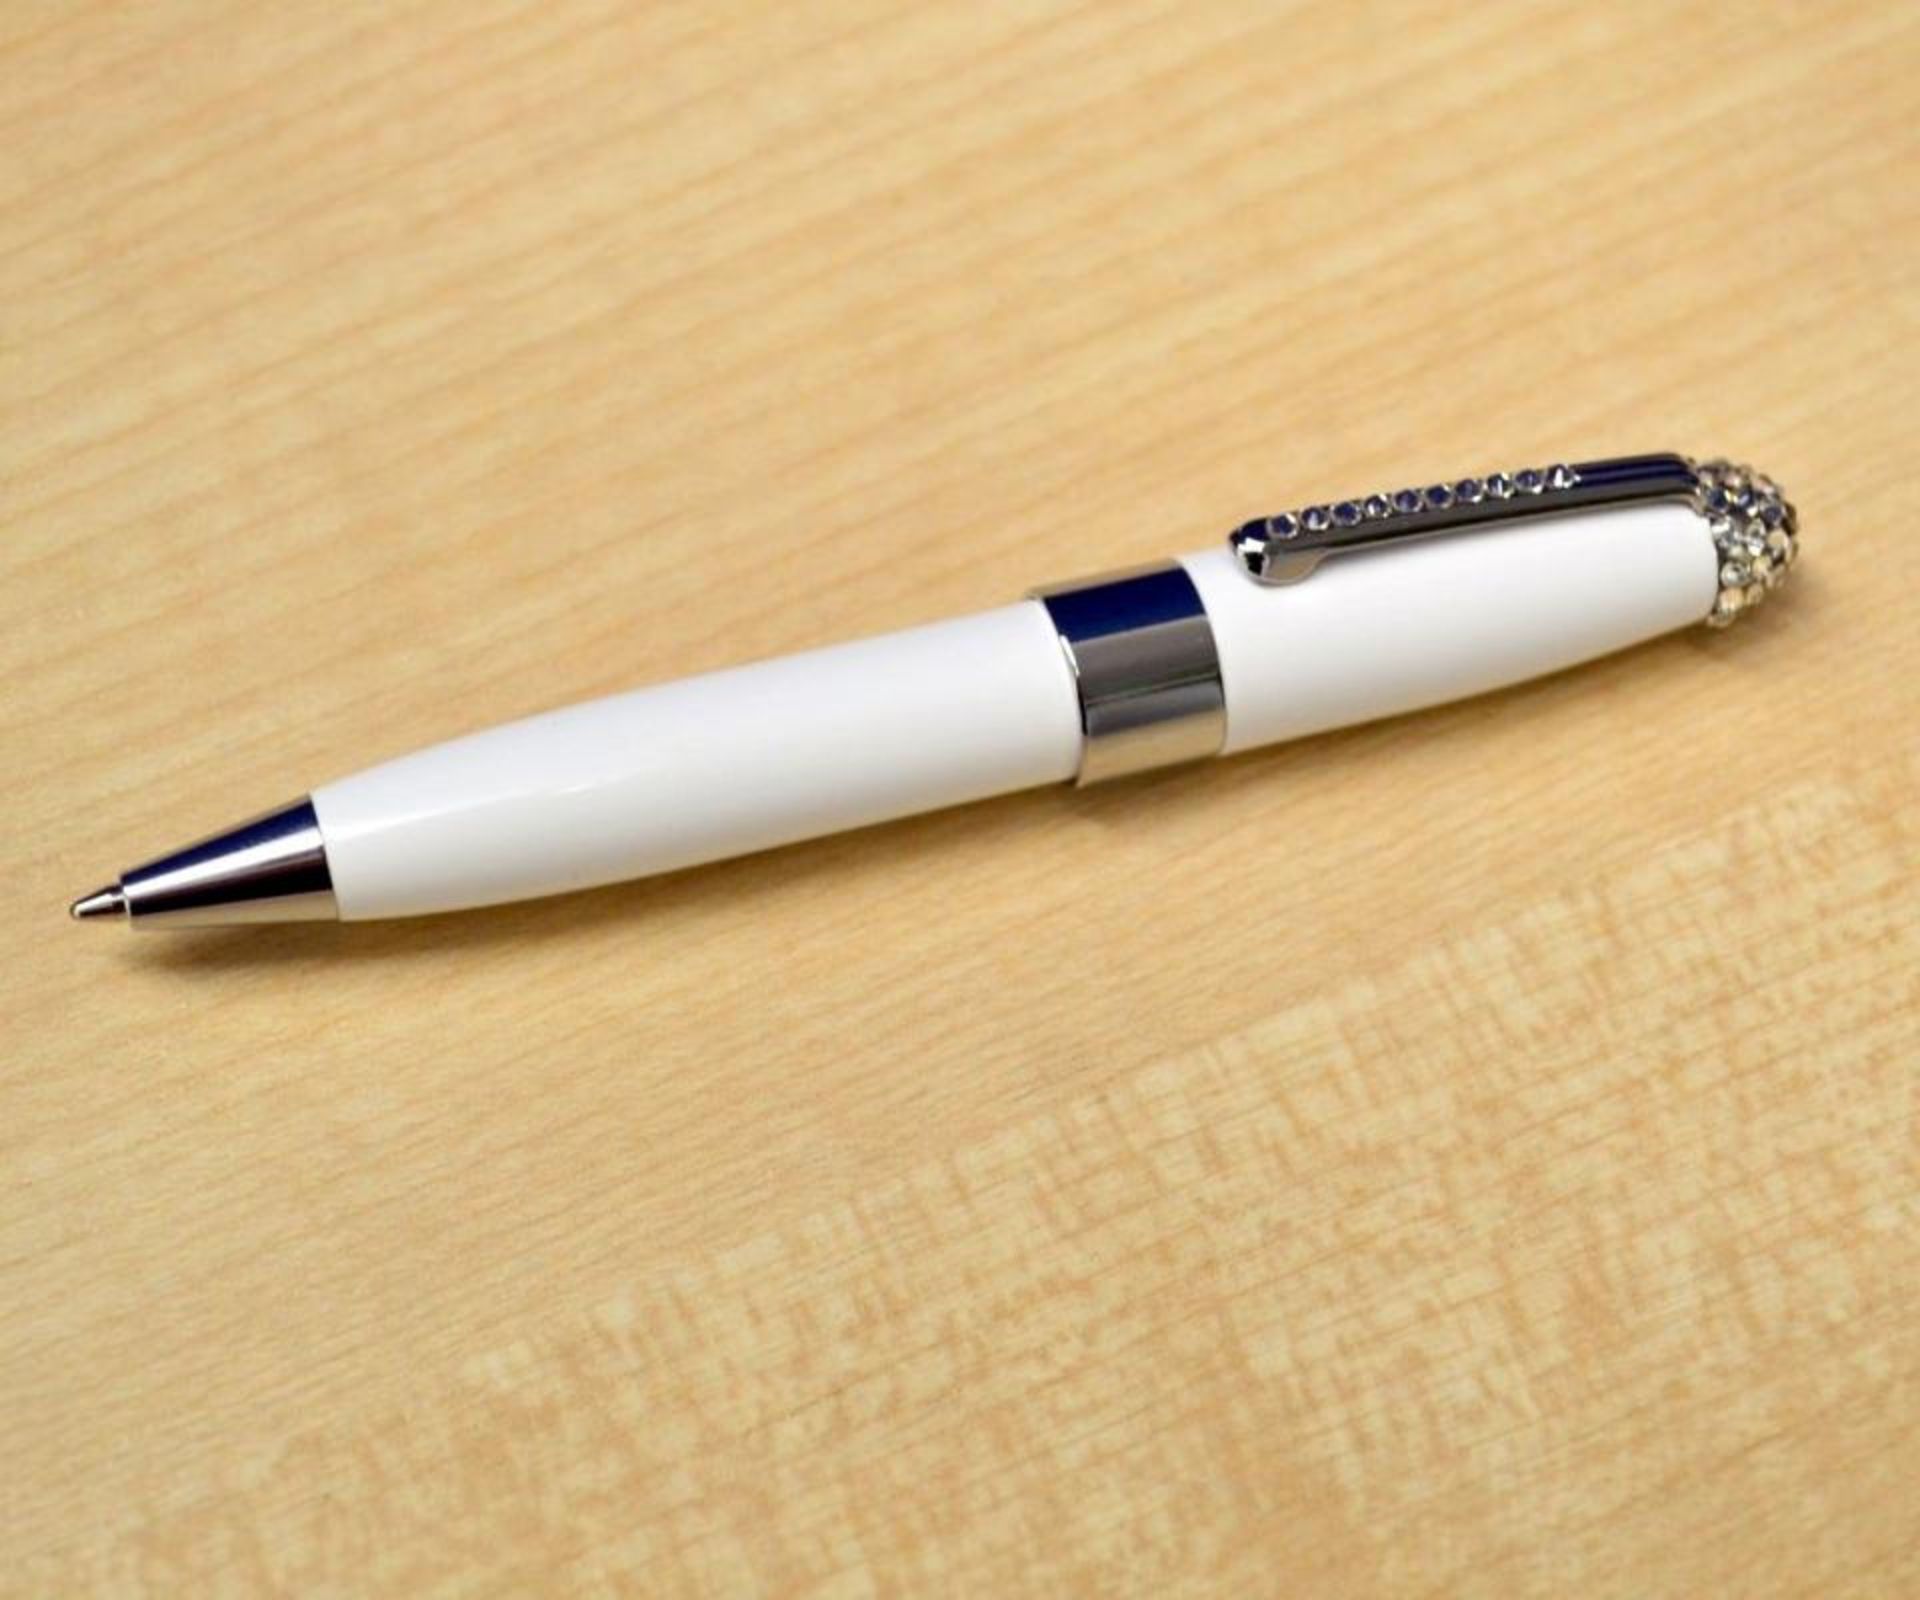 1 x ICE LONDON "Duchess" Ladies Pen Embellished With SWAROVSKI Crystals - Colour: White - Brand New - Image 2 of 3